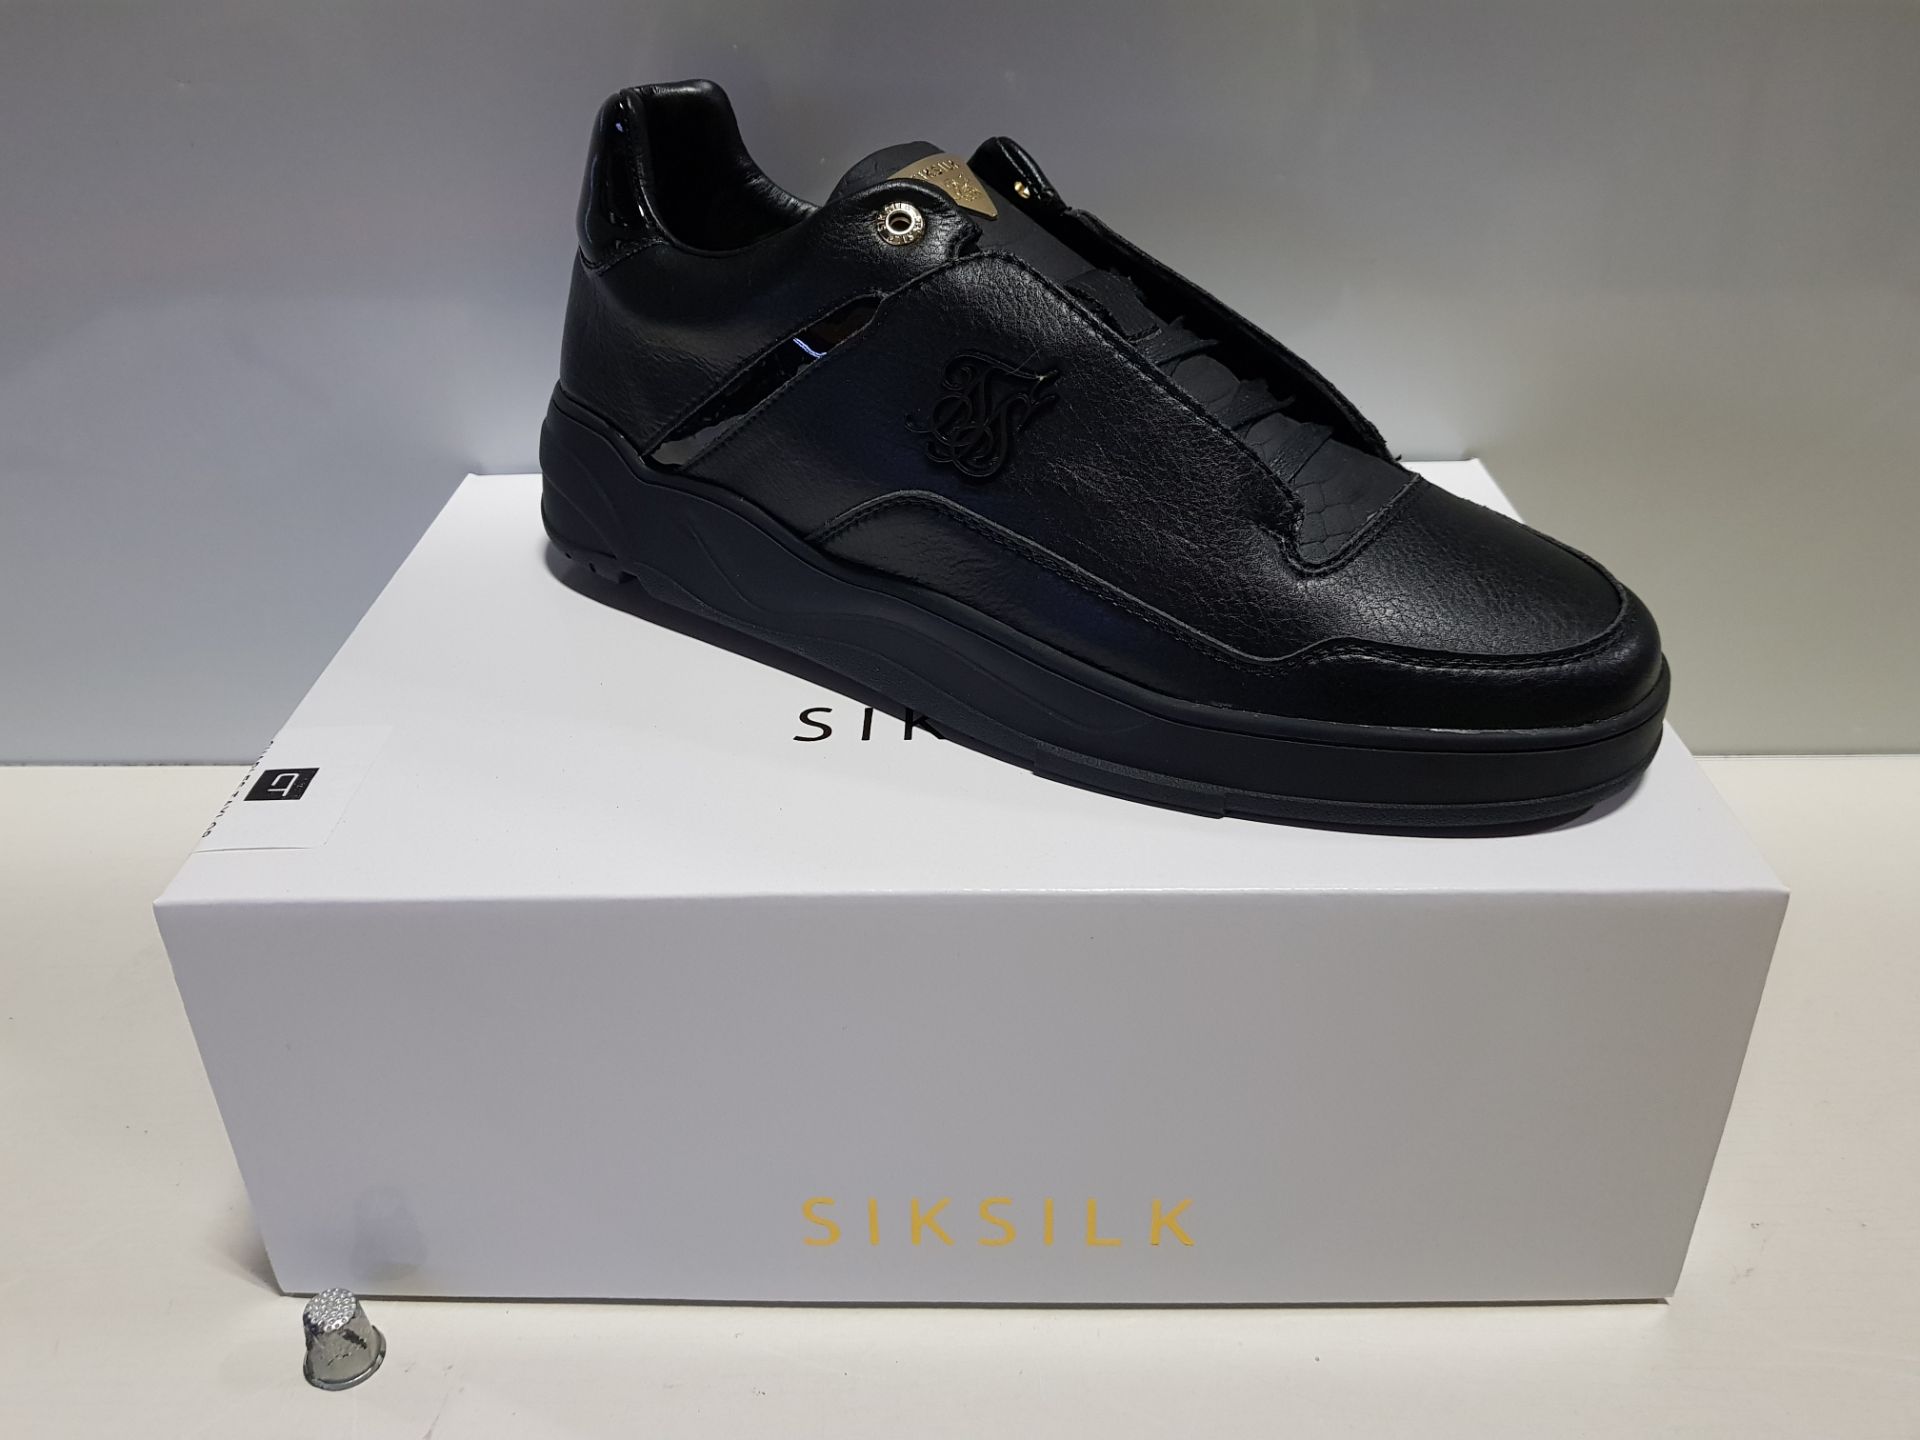 4 X BRAND NEW SIK SILK BLAZE LUX IN BLACK AND GOLD - IN SIZE UK 10 - ( SS-16120 )